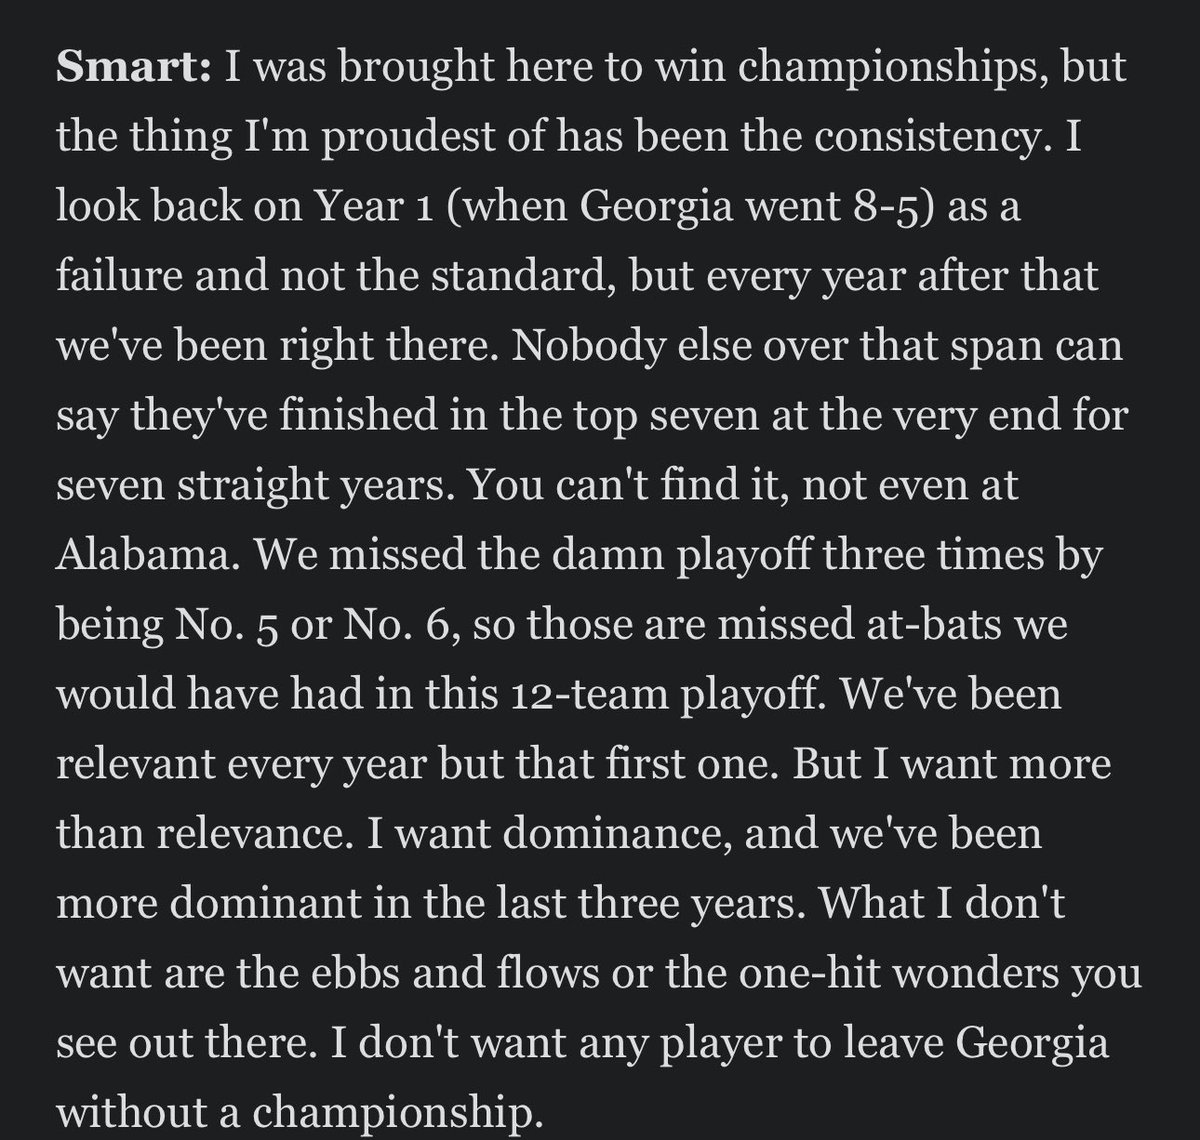 Kirby Smart: “I want dominance” “I don’t want any player to leave Georgia without a championship” Top 7 finish for 7 straight years. This is the type of standard that excites people/players/organizations. How could you not want your kid playing for this guy?